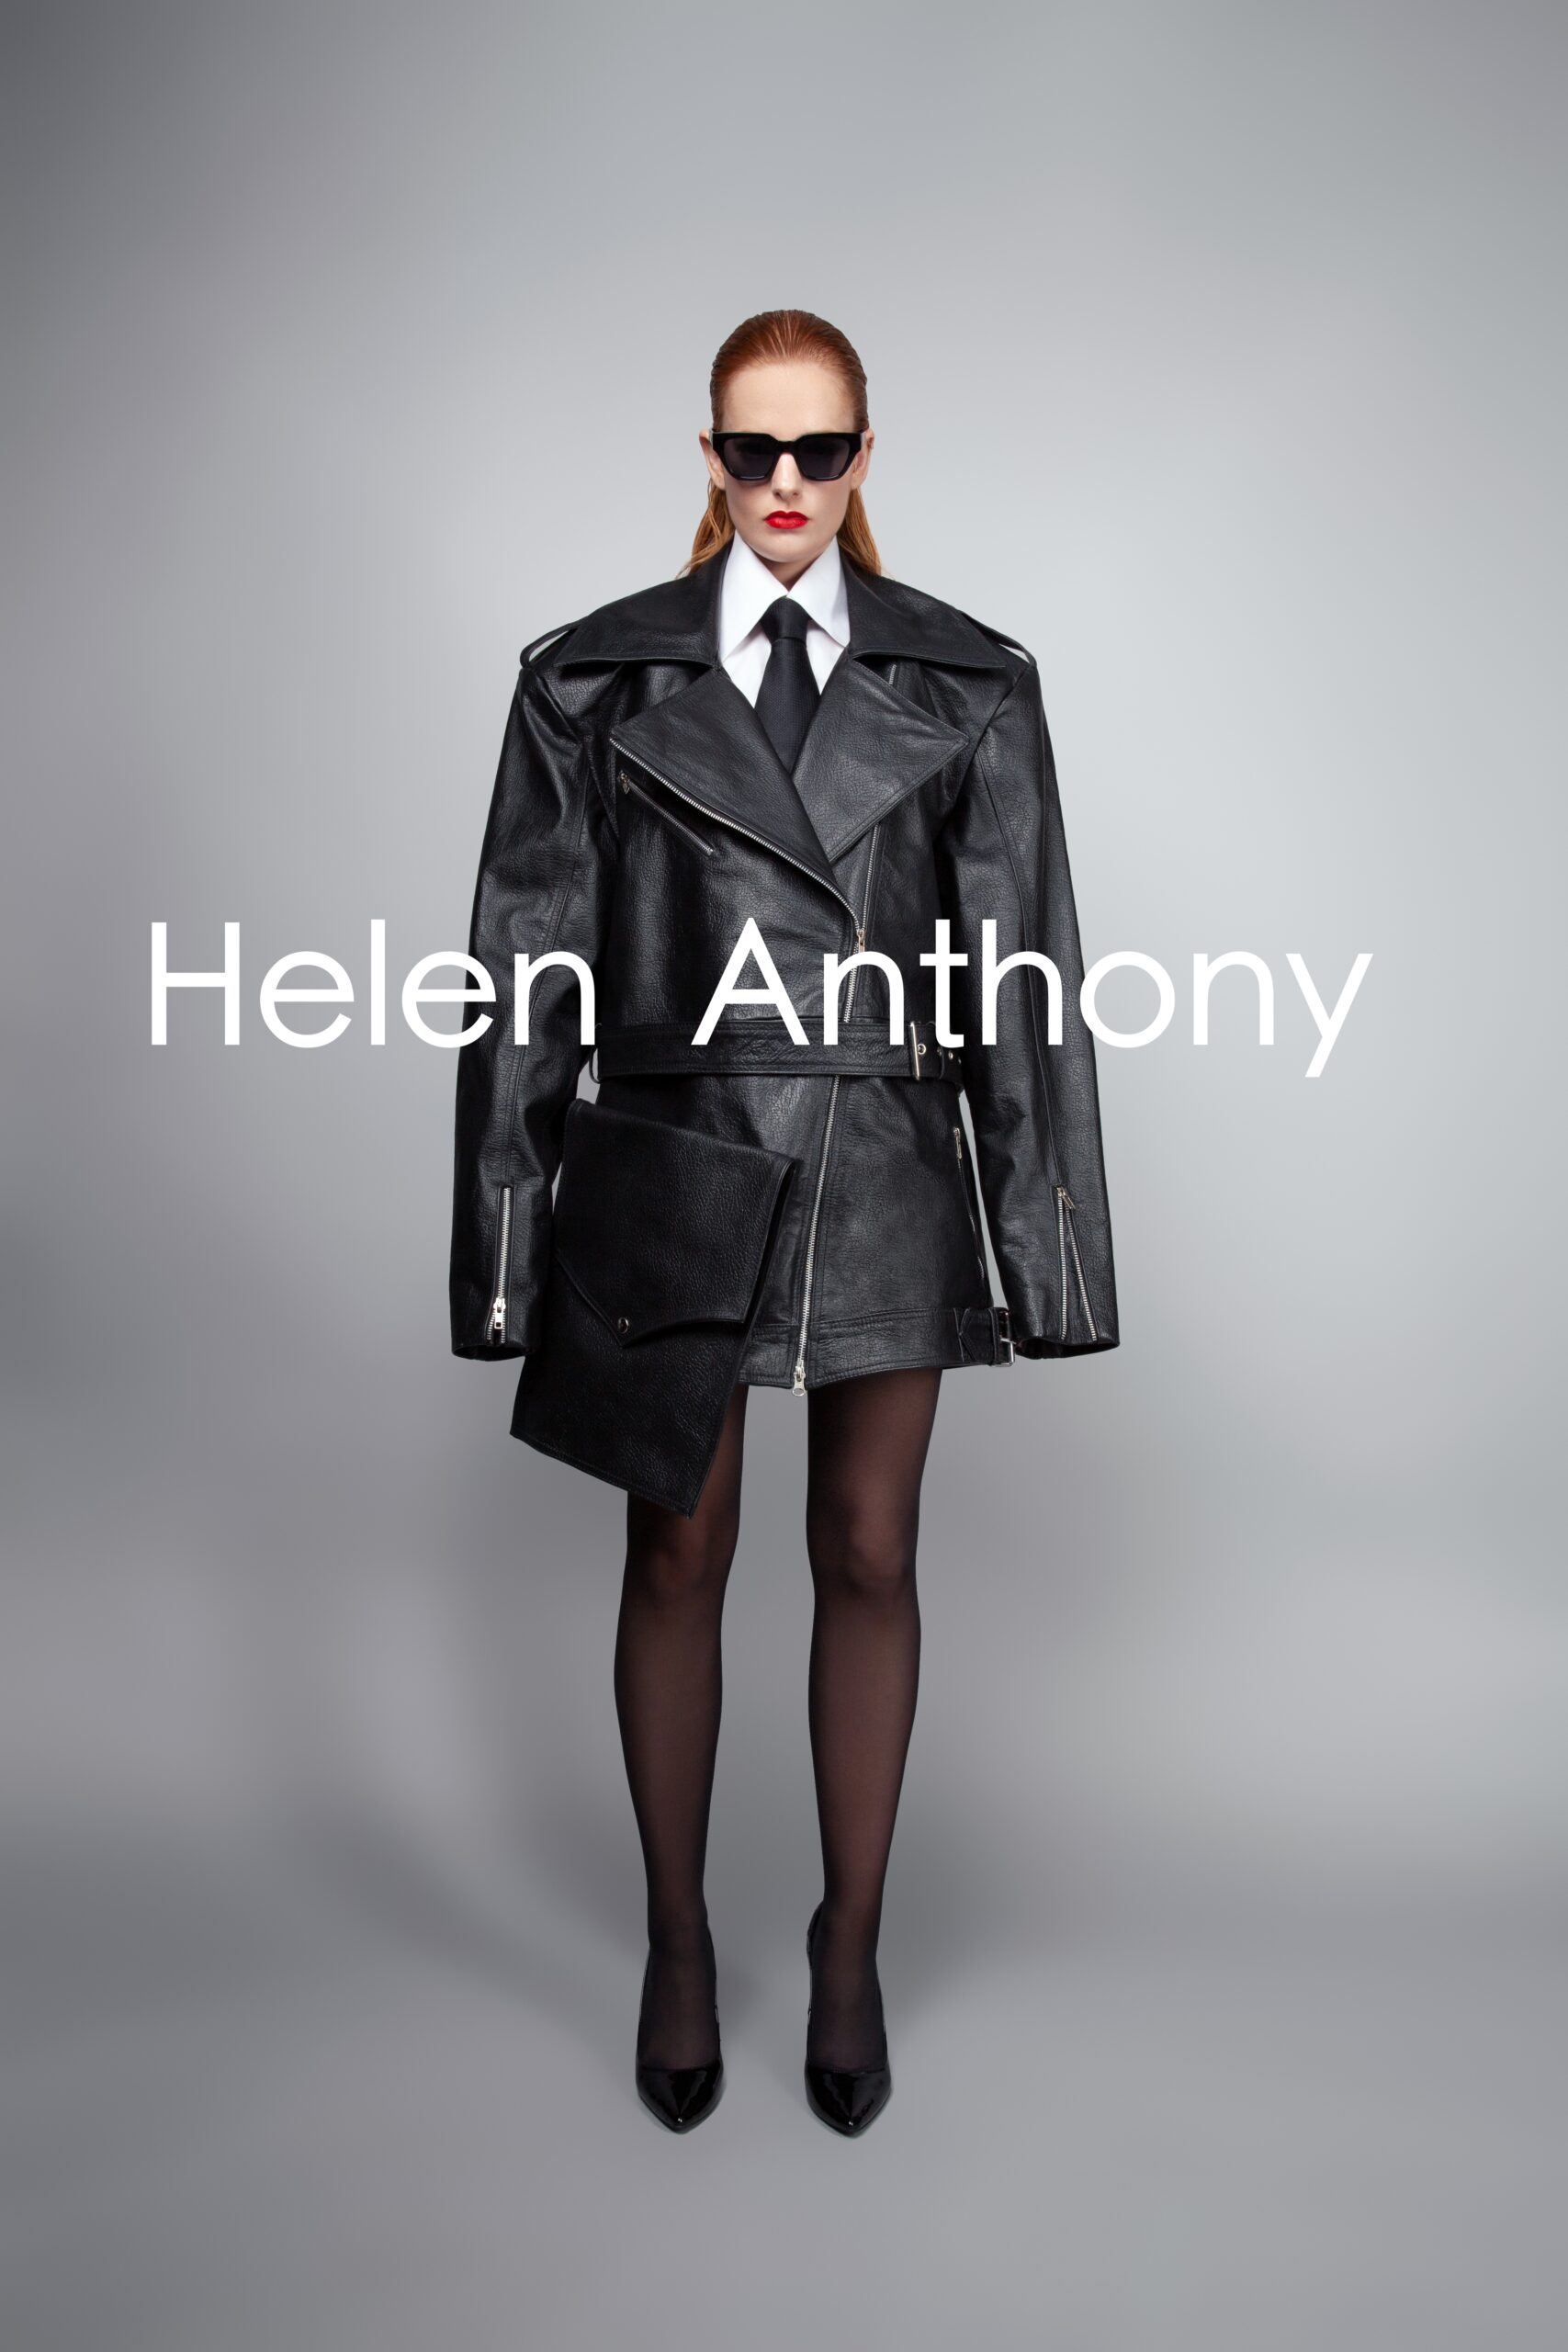 HELEN ANTHONY CAMPAIGN